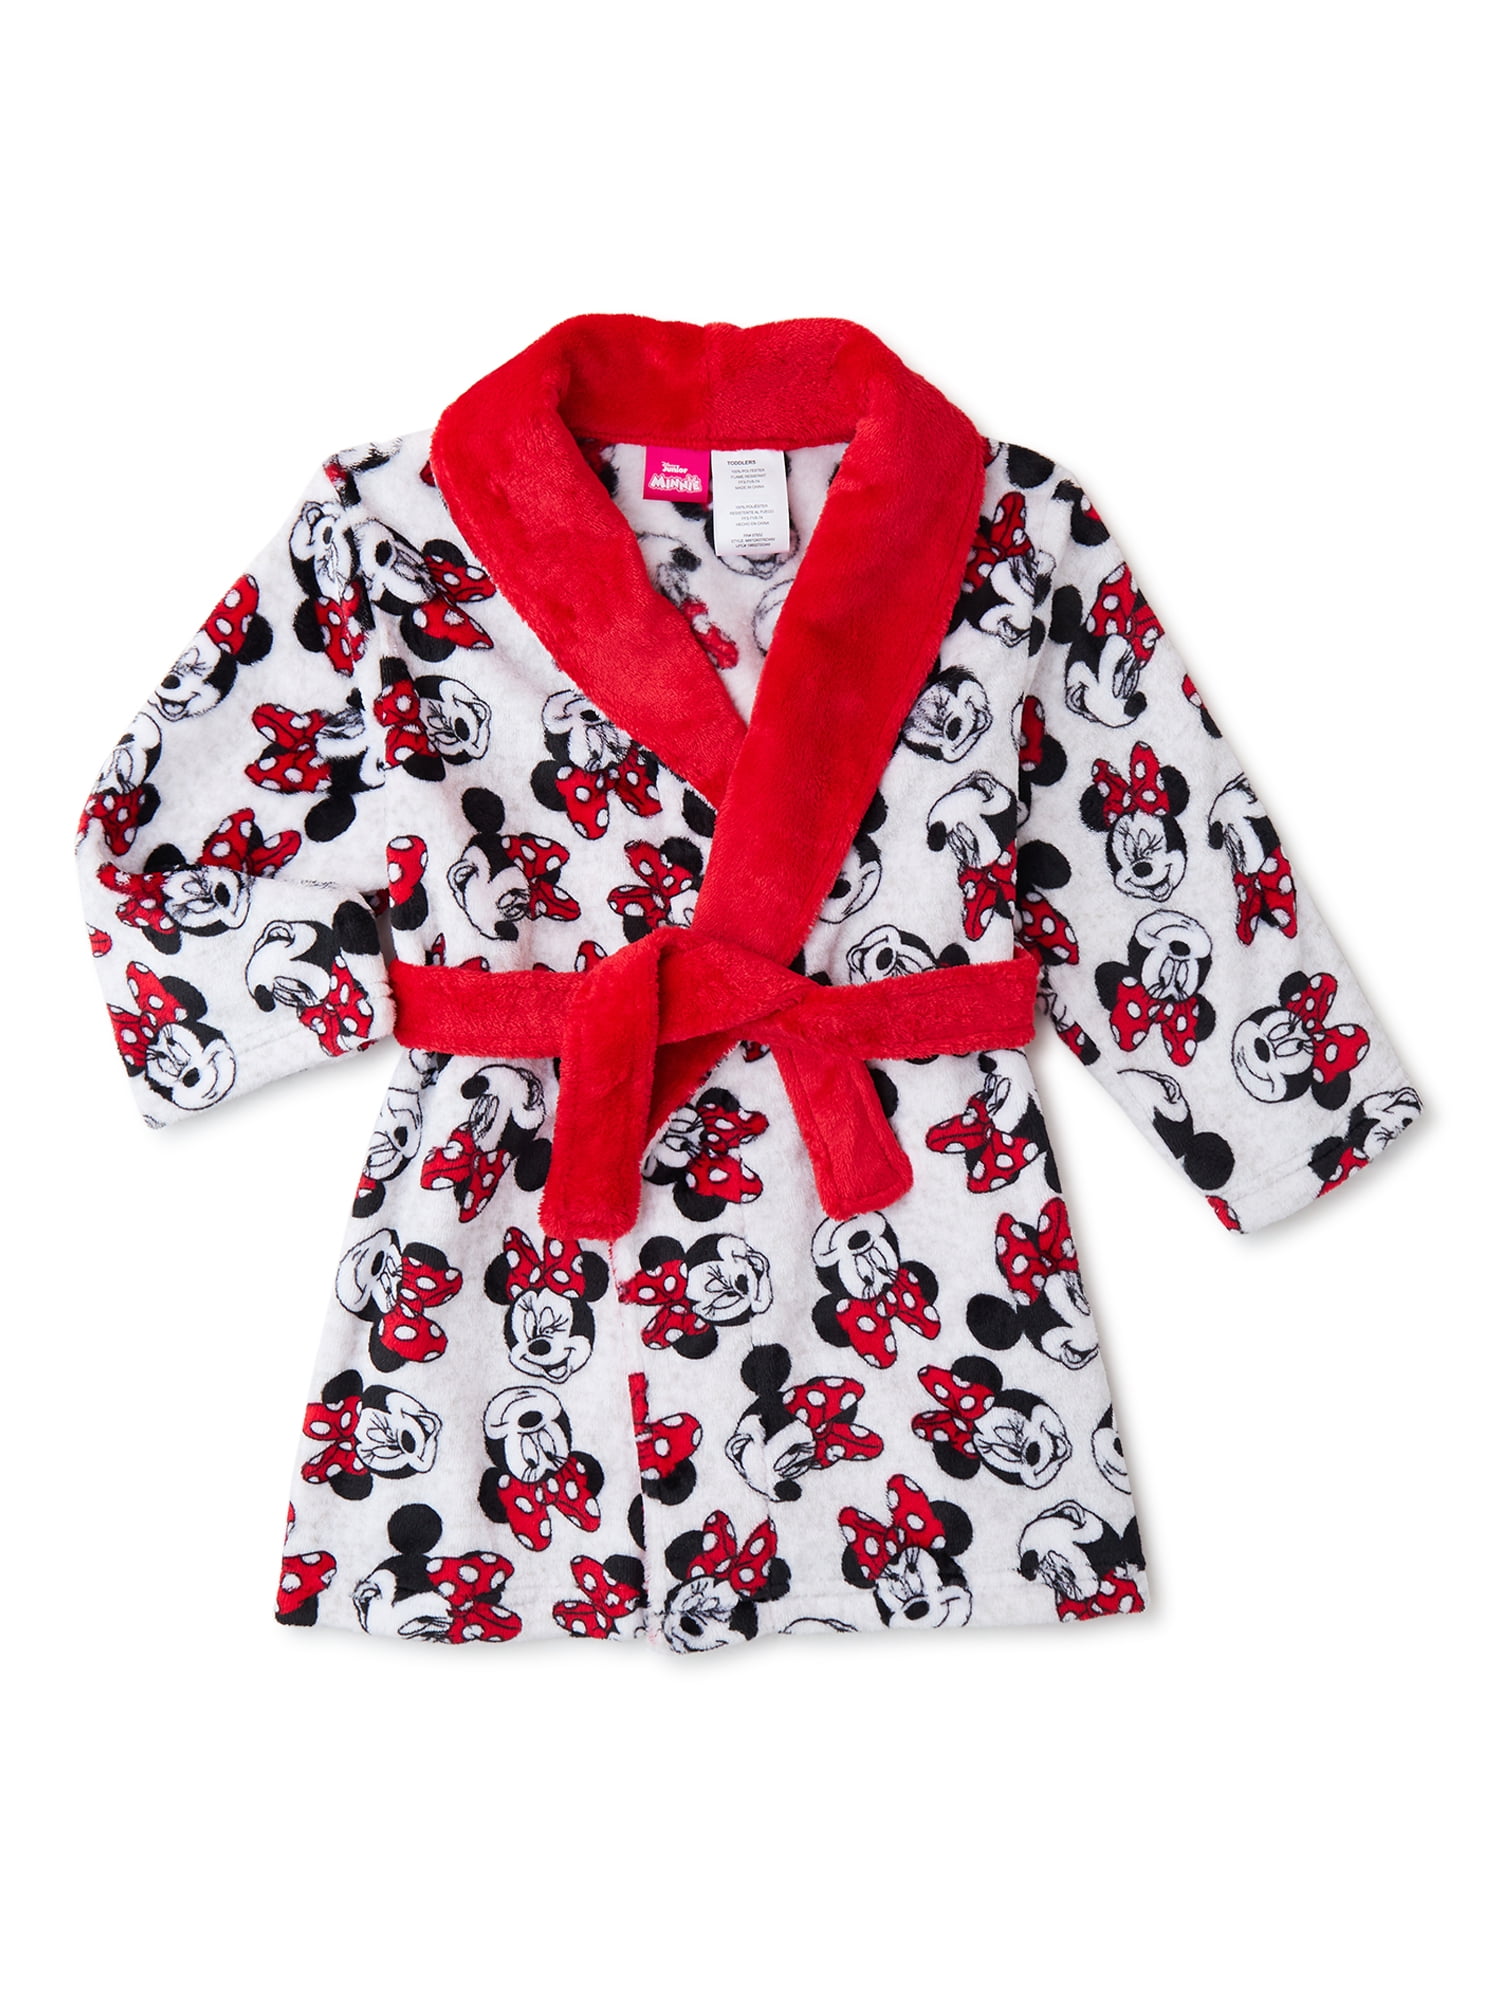 Minnie Mouse Toddler Girls Pajama Robe, Sizes 2T-5T